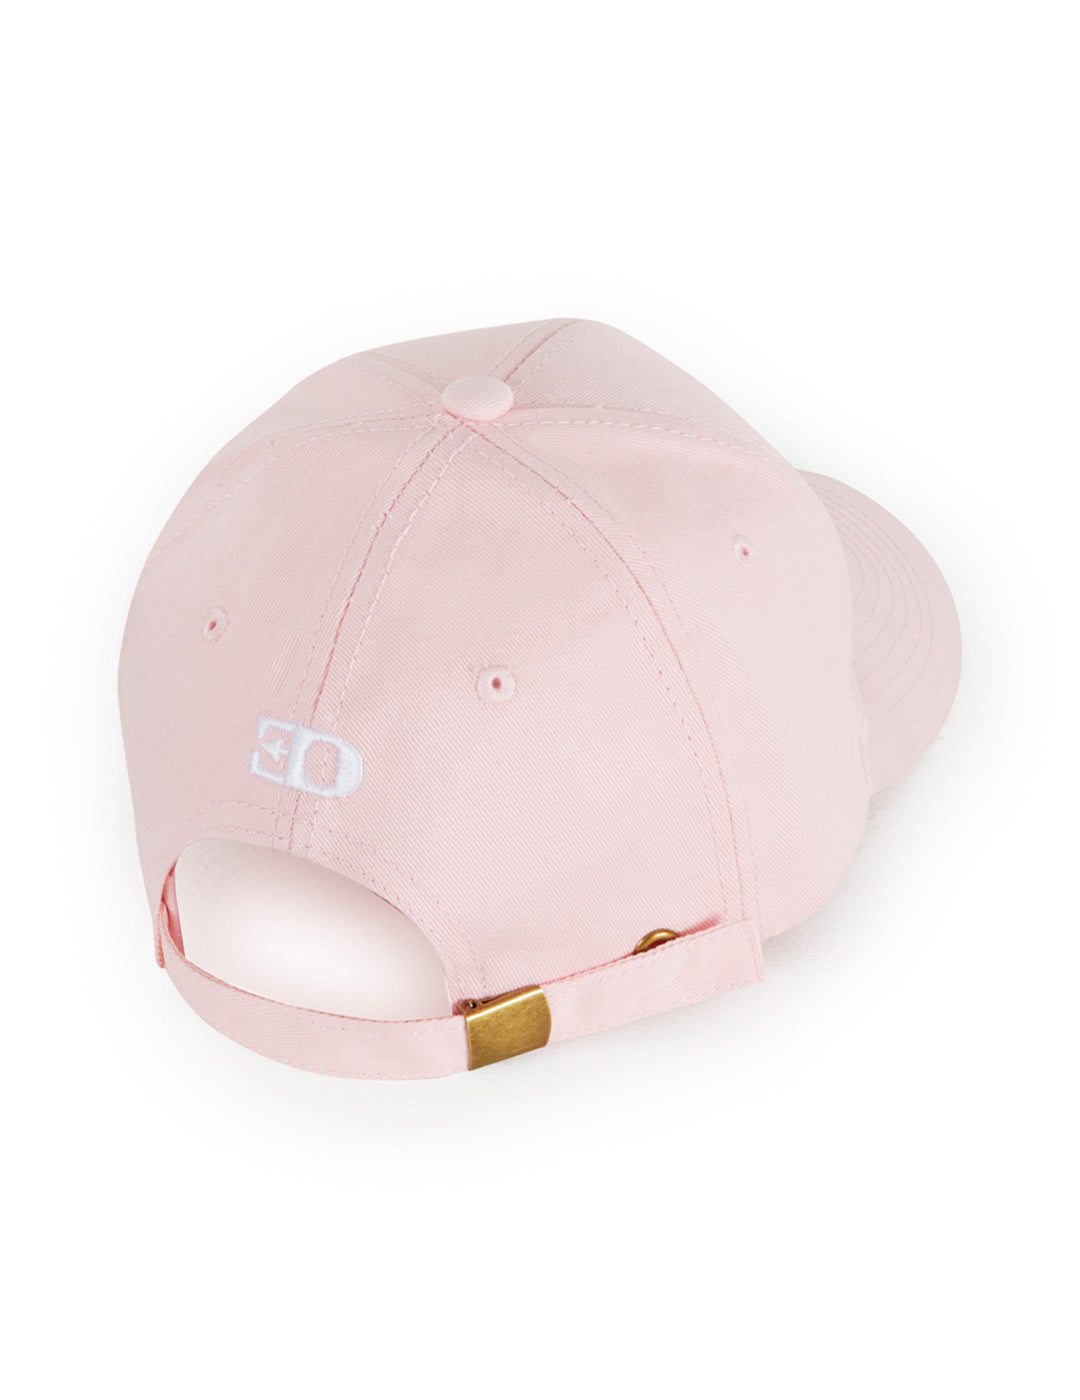 THE LOGO BASEBALL HAT IN PINK COTTON